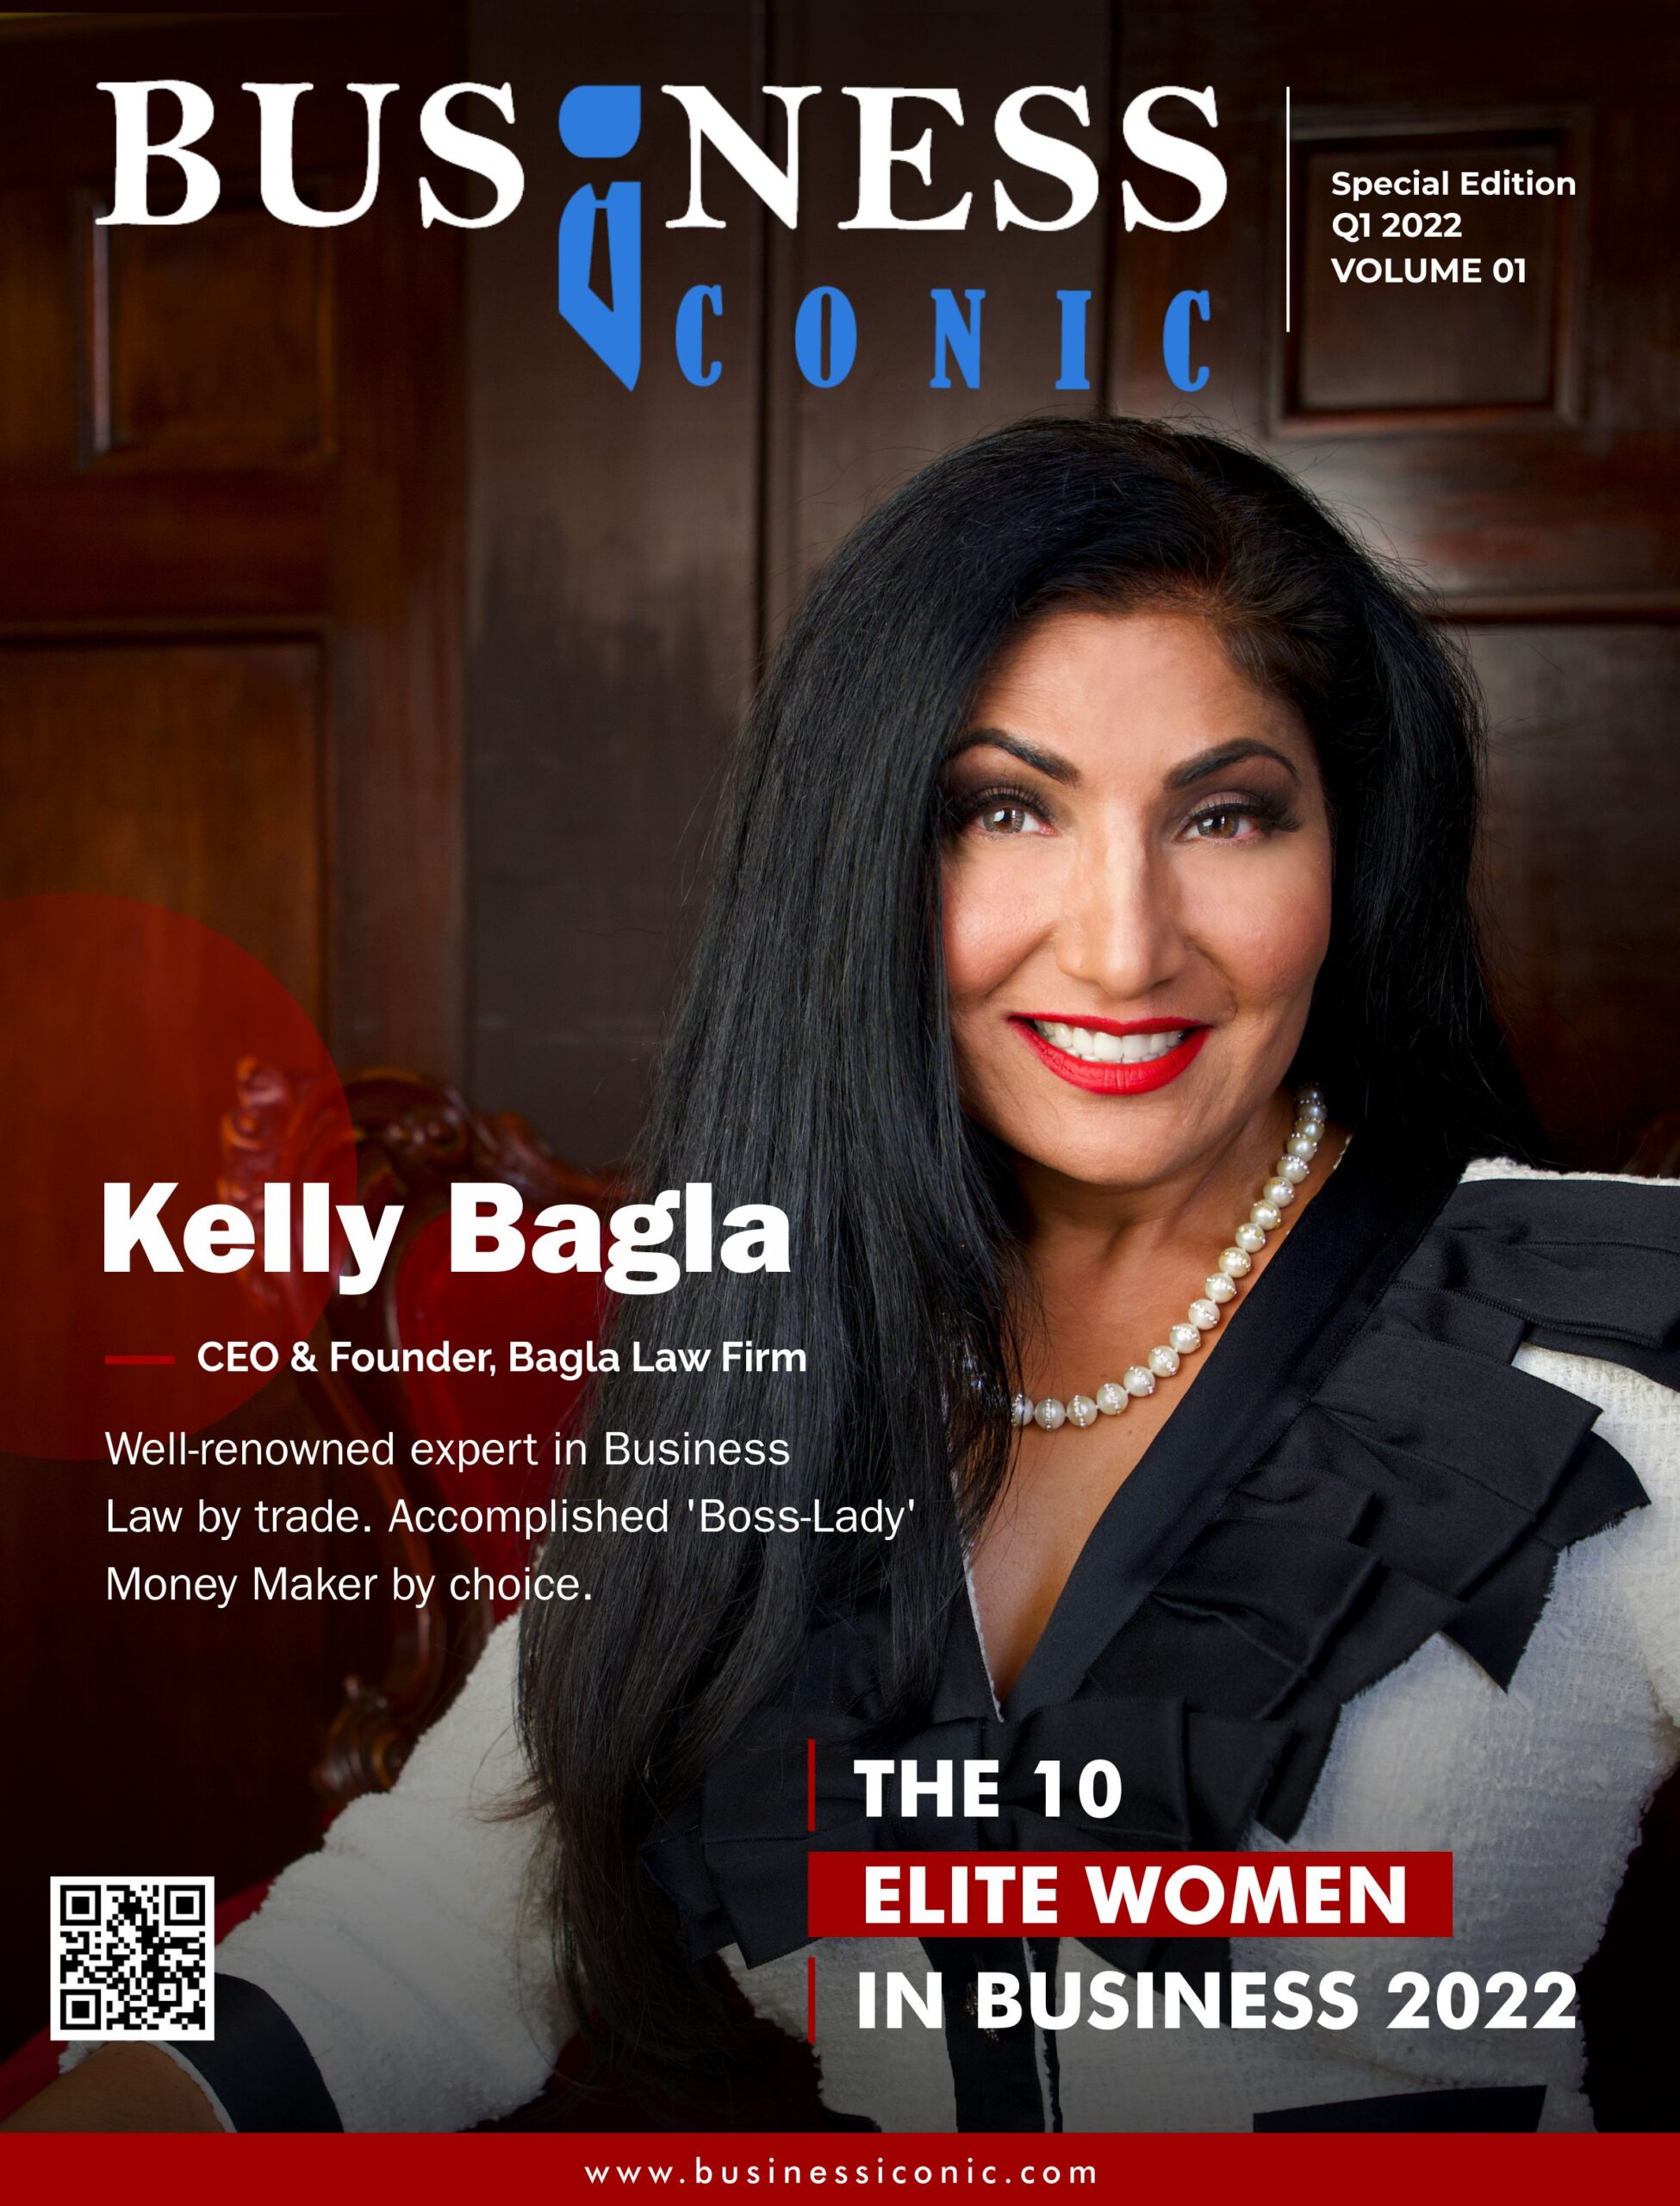 The 10 ELITE WOMEN IN BUSINESS 2022 – Business Iconic